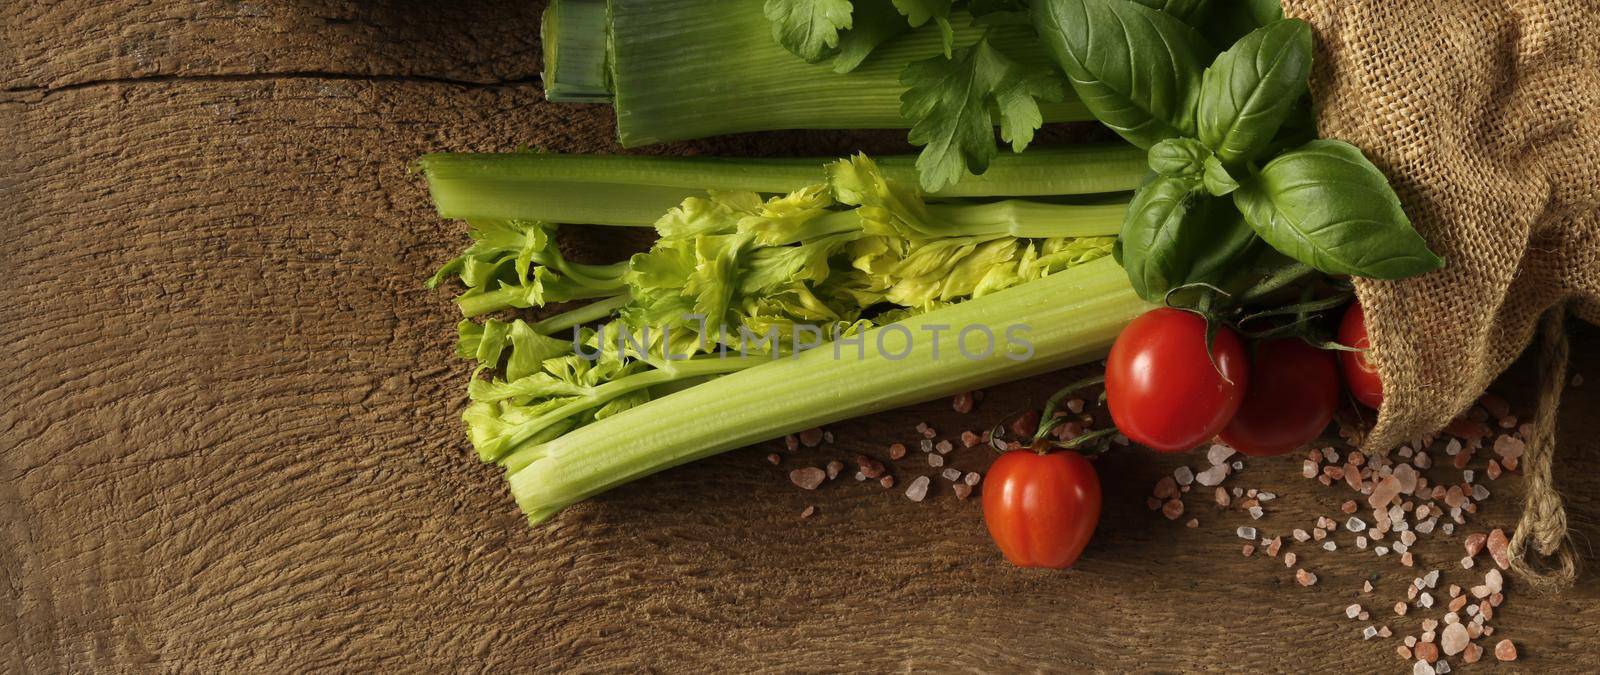 Rustic background with freshly picked vegetables by NelliPolk